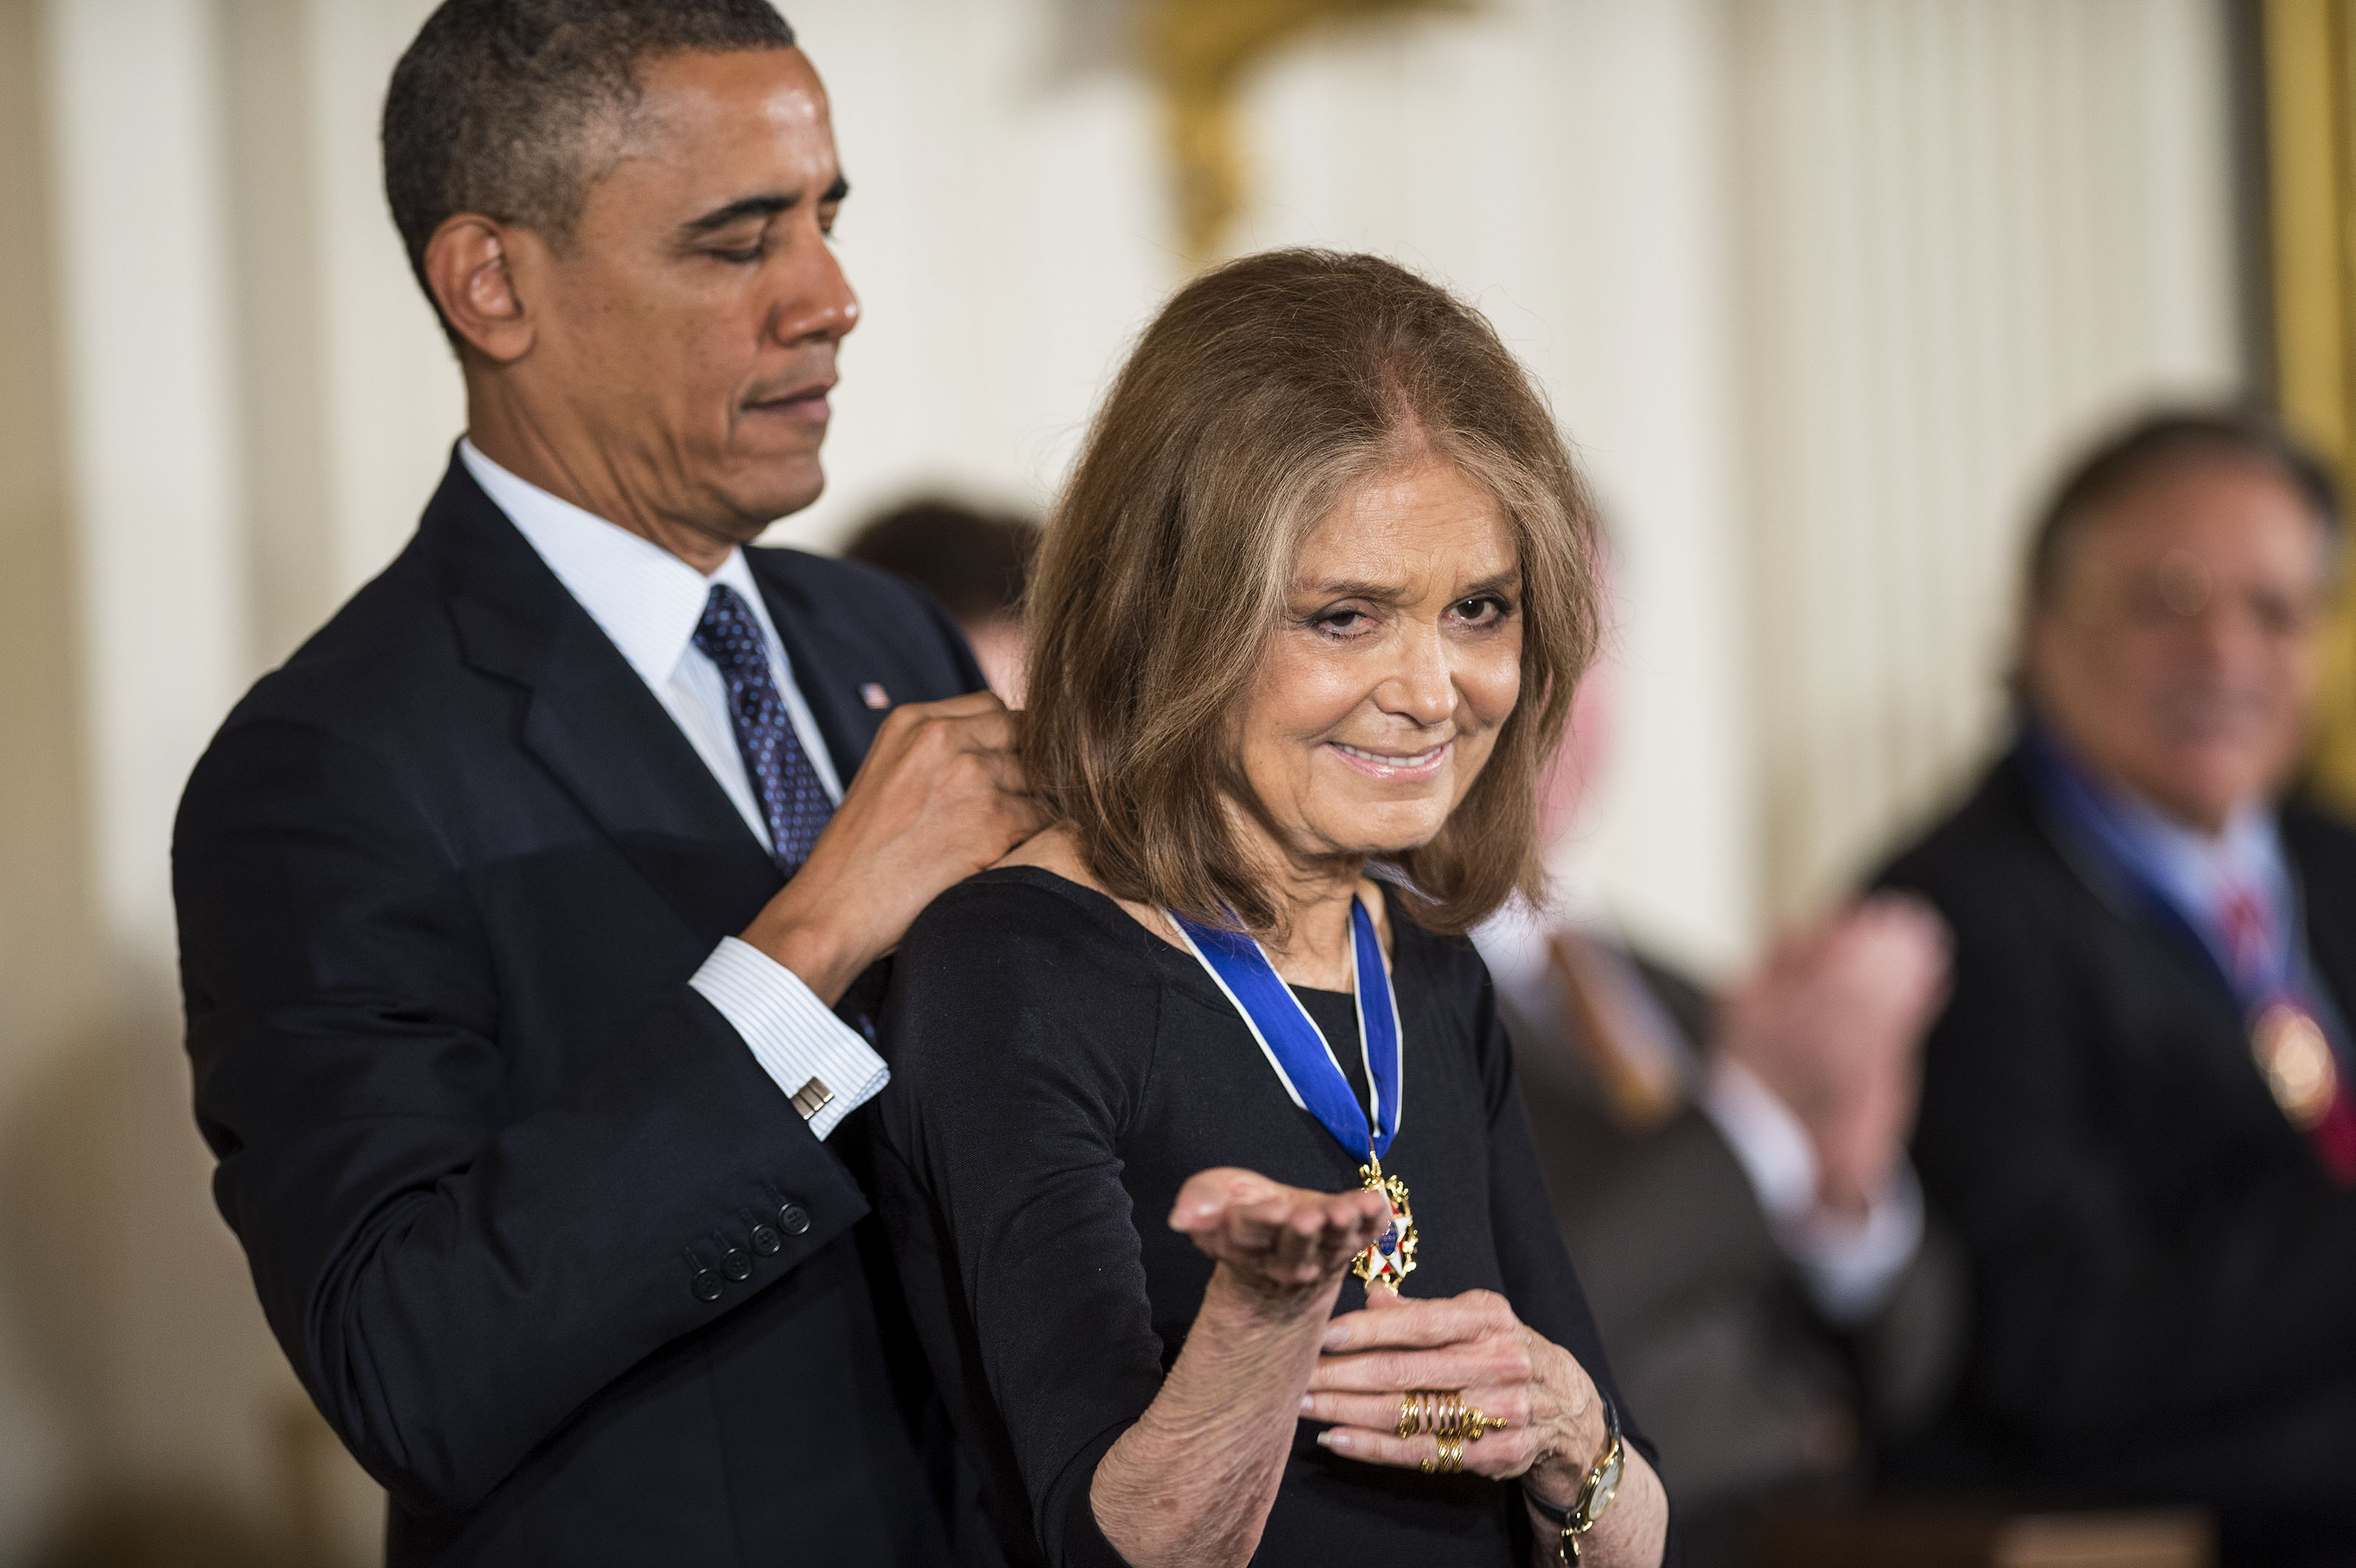 Gloria Steinem receives the 2013 Presidential Medal of Freedom from President Barack Obama at the White House on November 20, 2013 in Washington. (Leigh Vogel—WireImage/Getty Images)